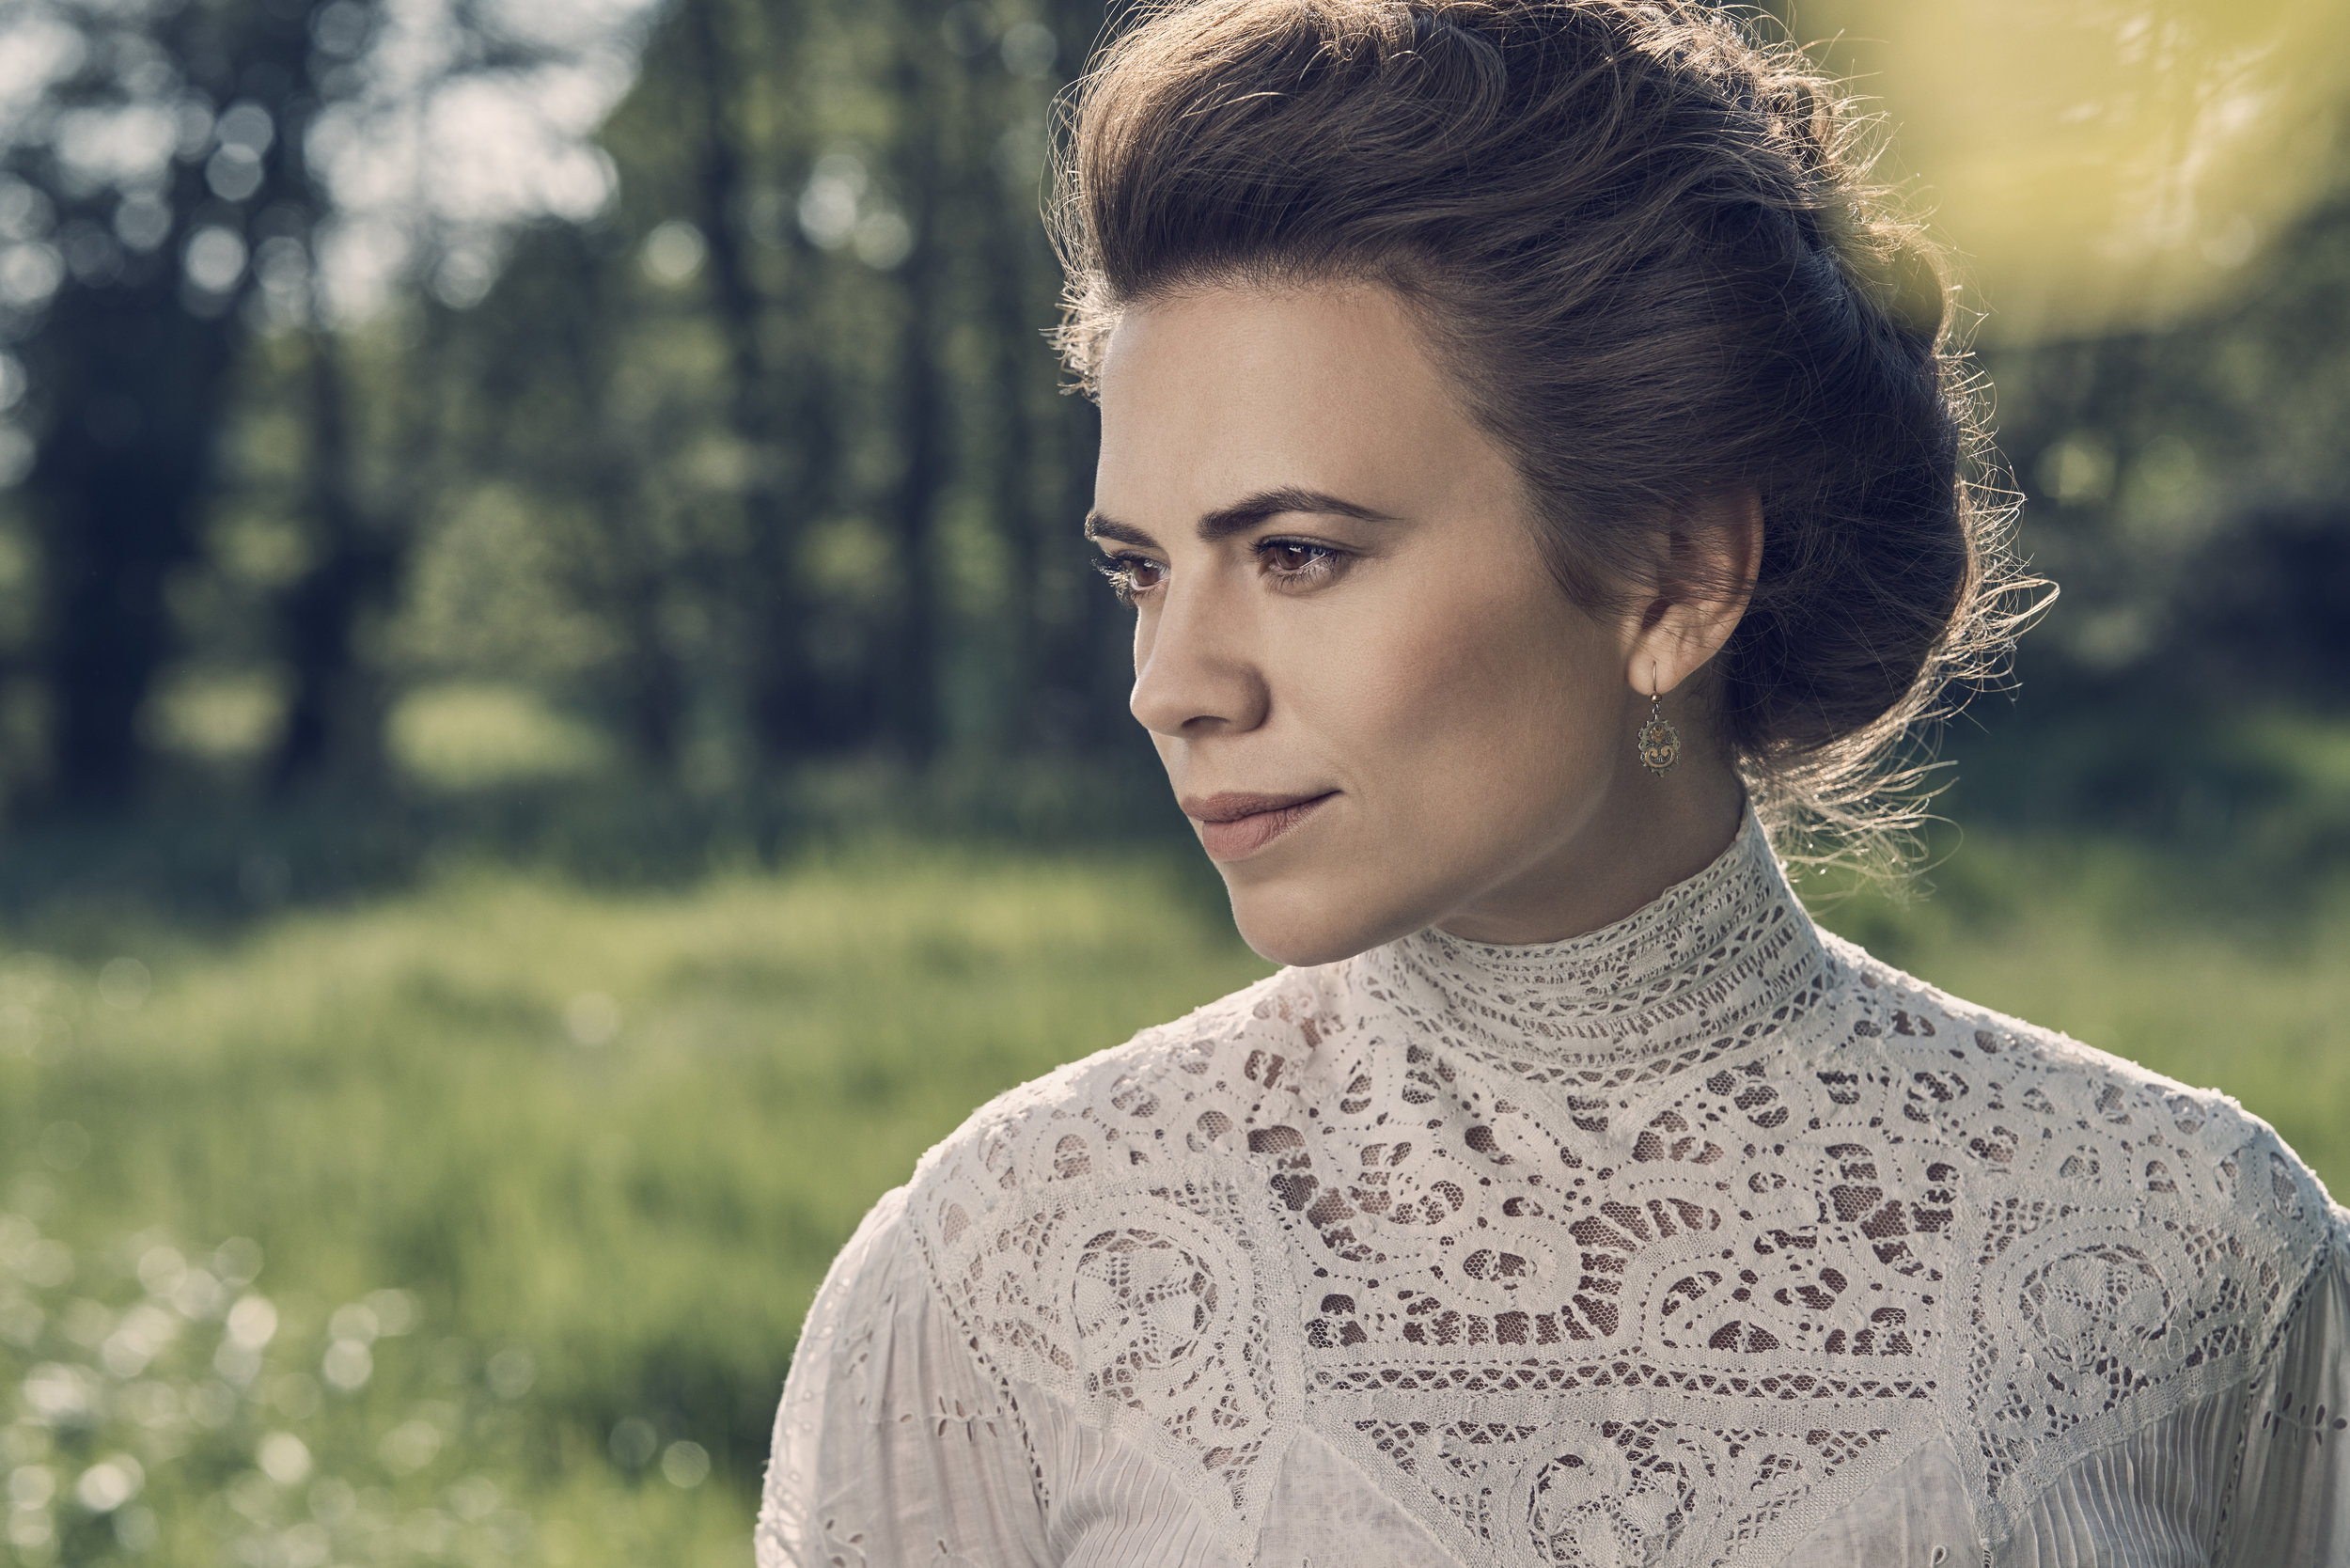   HOWARDS END  “Breathtaking television”  The Atlantic  